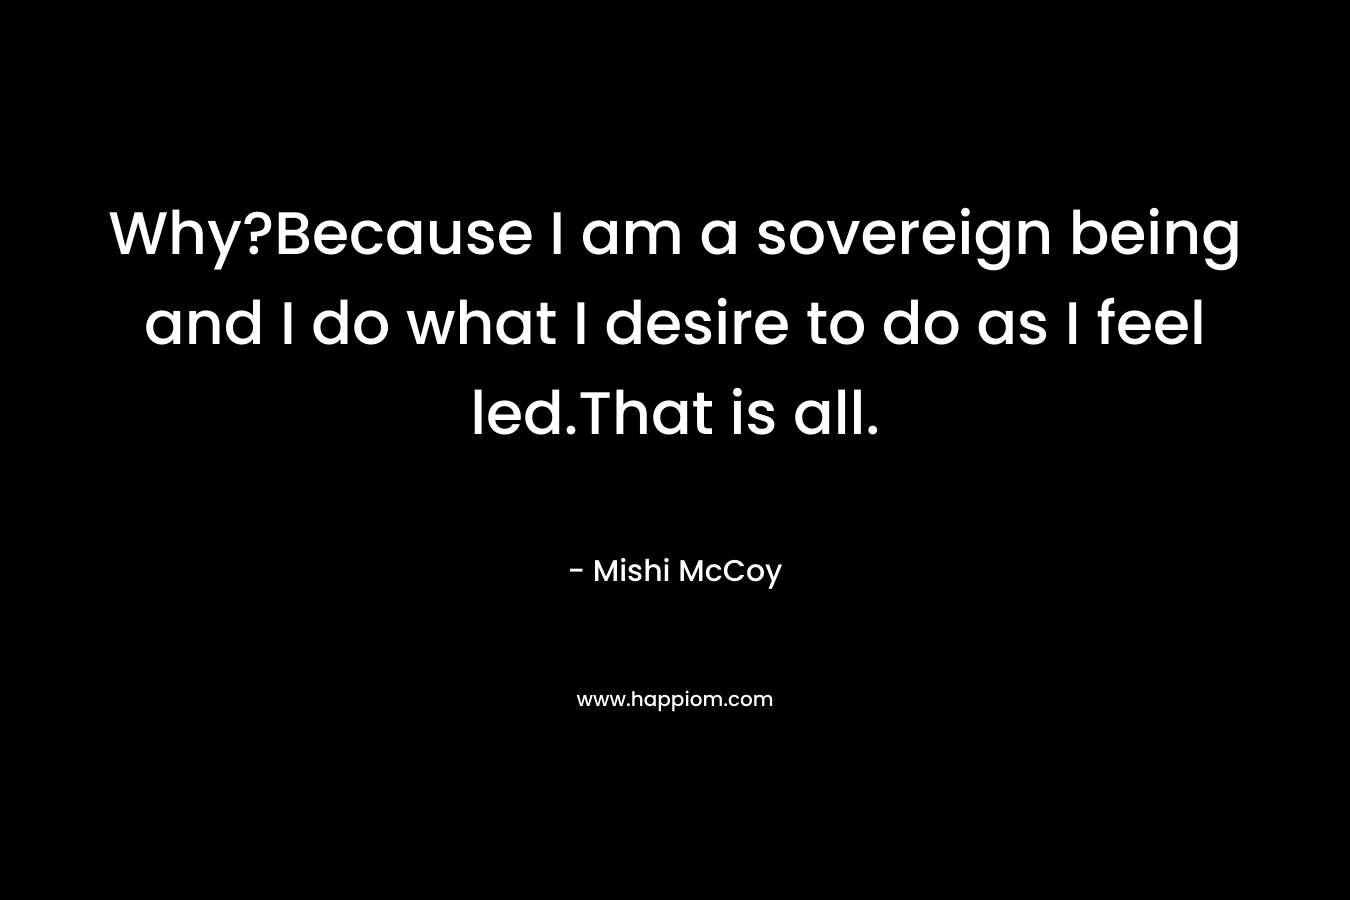 Why?Because I am a sovereign being and I do what I desire to do as I feel led.That is all.